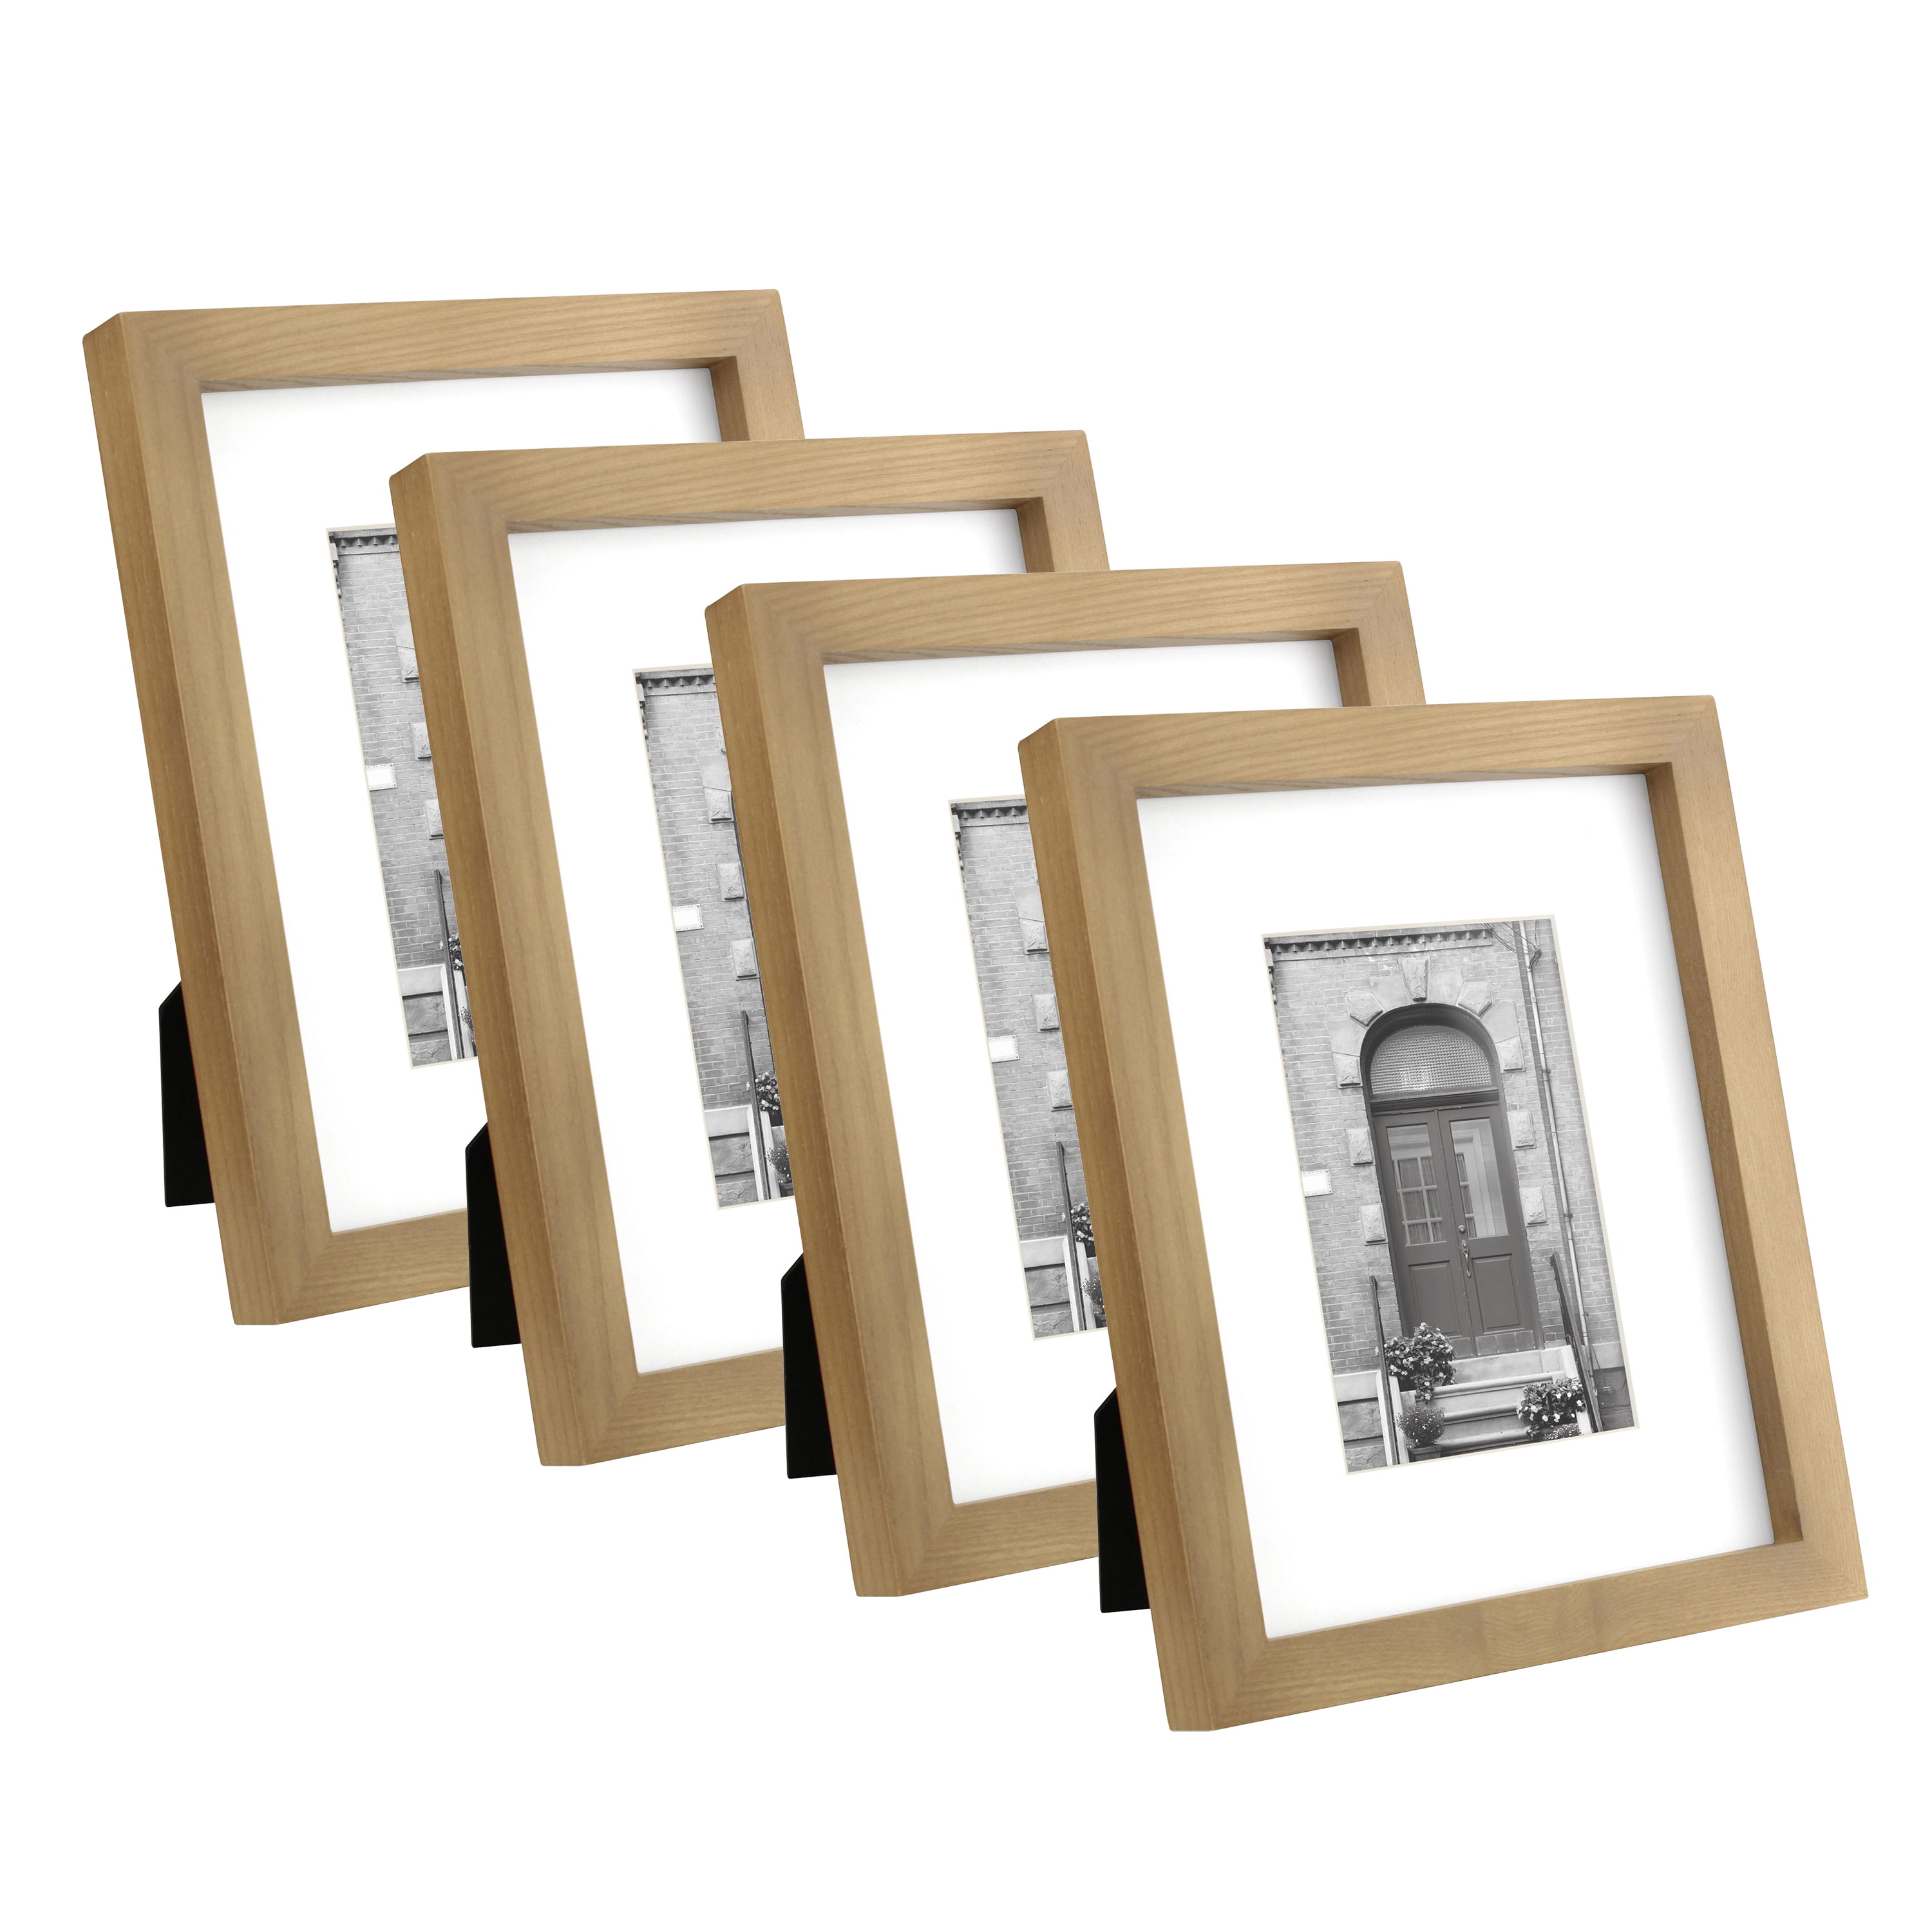 Picture Frame Wood - 4x6 (Grey) – Houseables